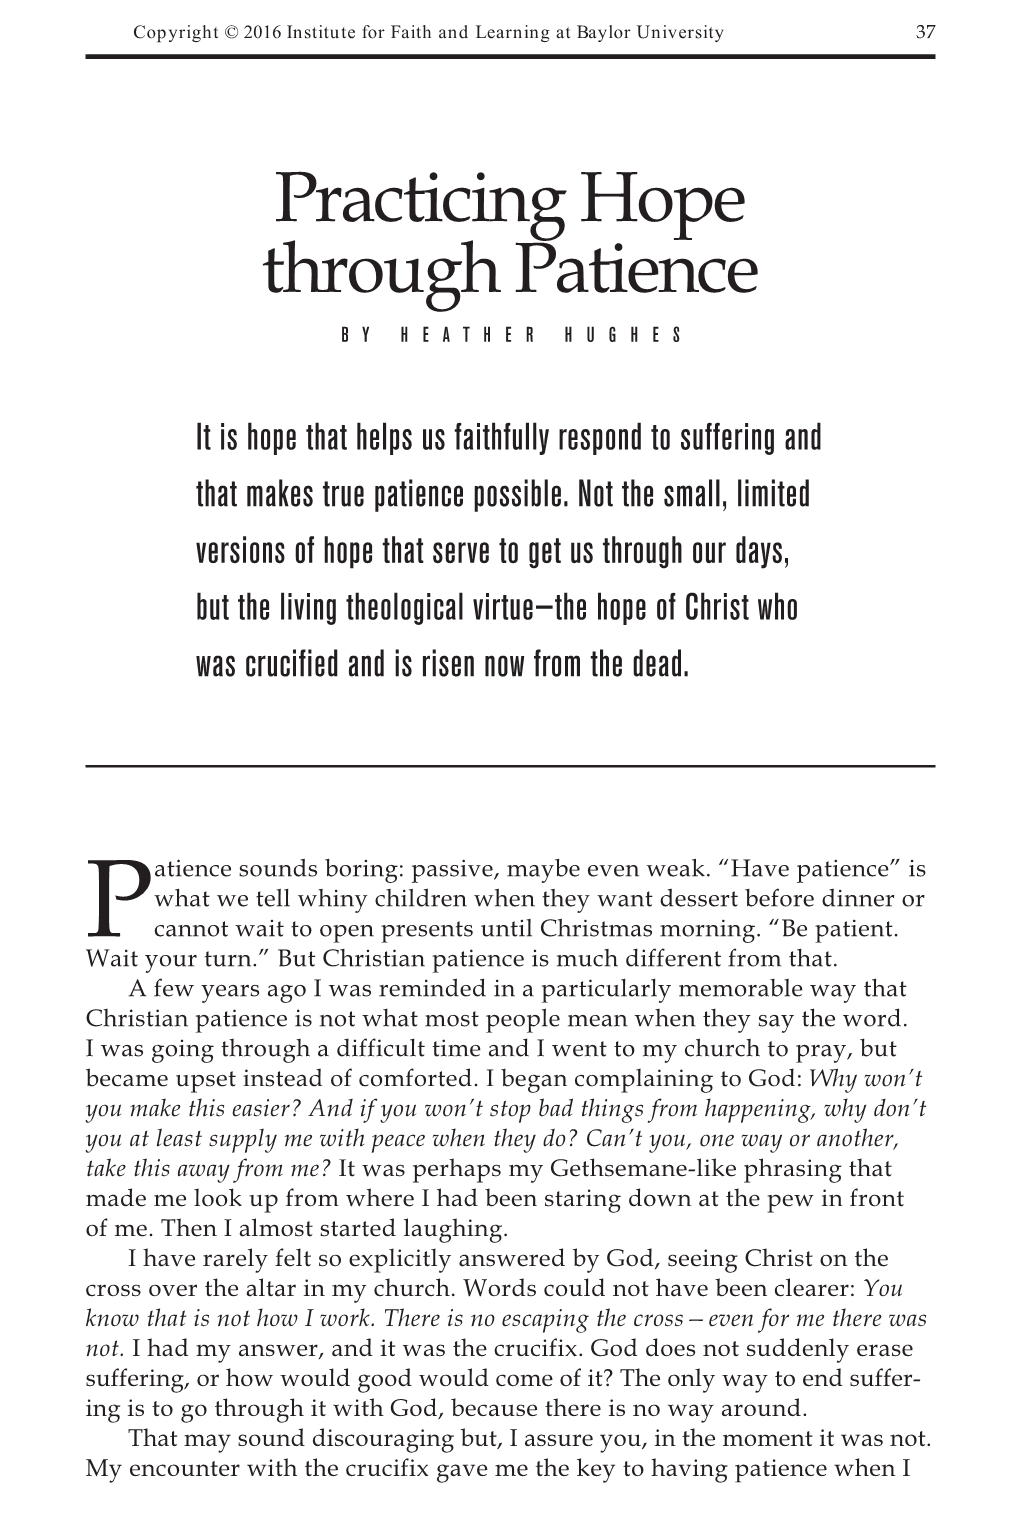 Practicing Hope Through Patience by HEATHER HUGHES